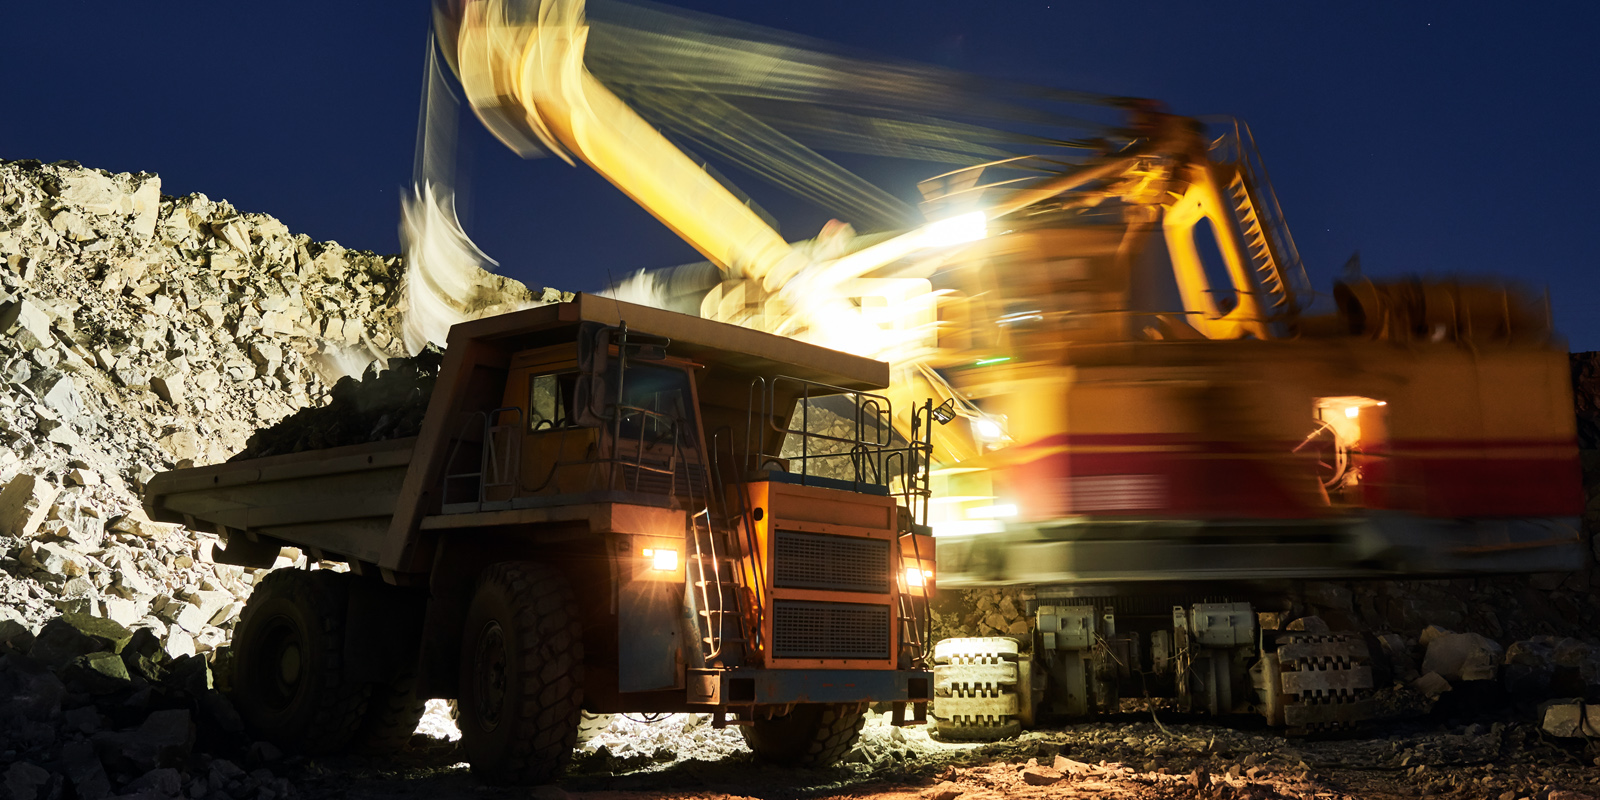 Image of a Truck Working in a Mine